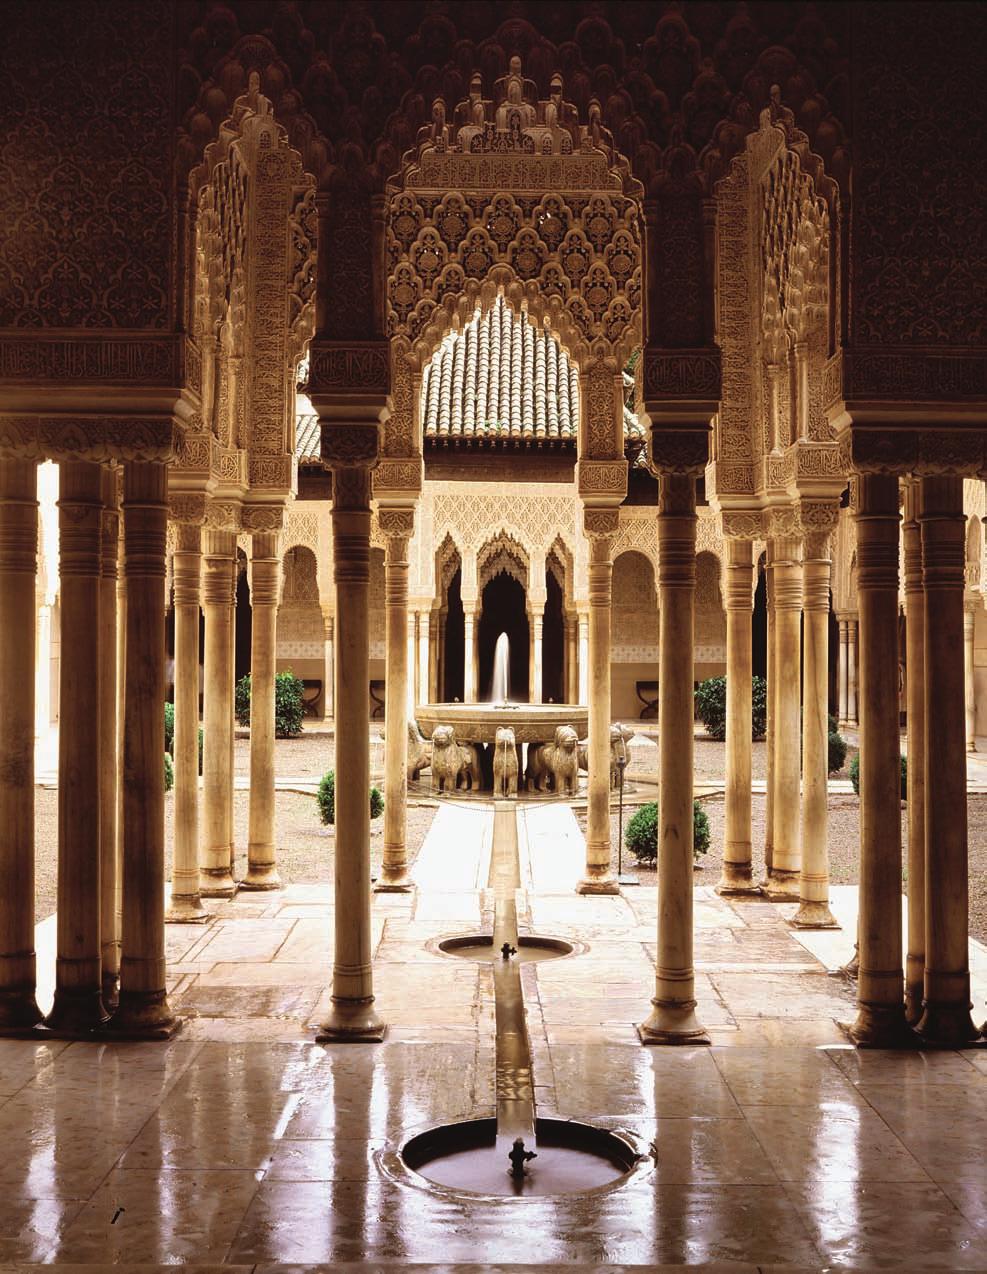 13-1 Court of the Lions, Palace of the Lions, Alhambra, Granada, Spain, 1354 1391.